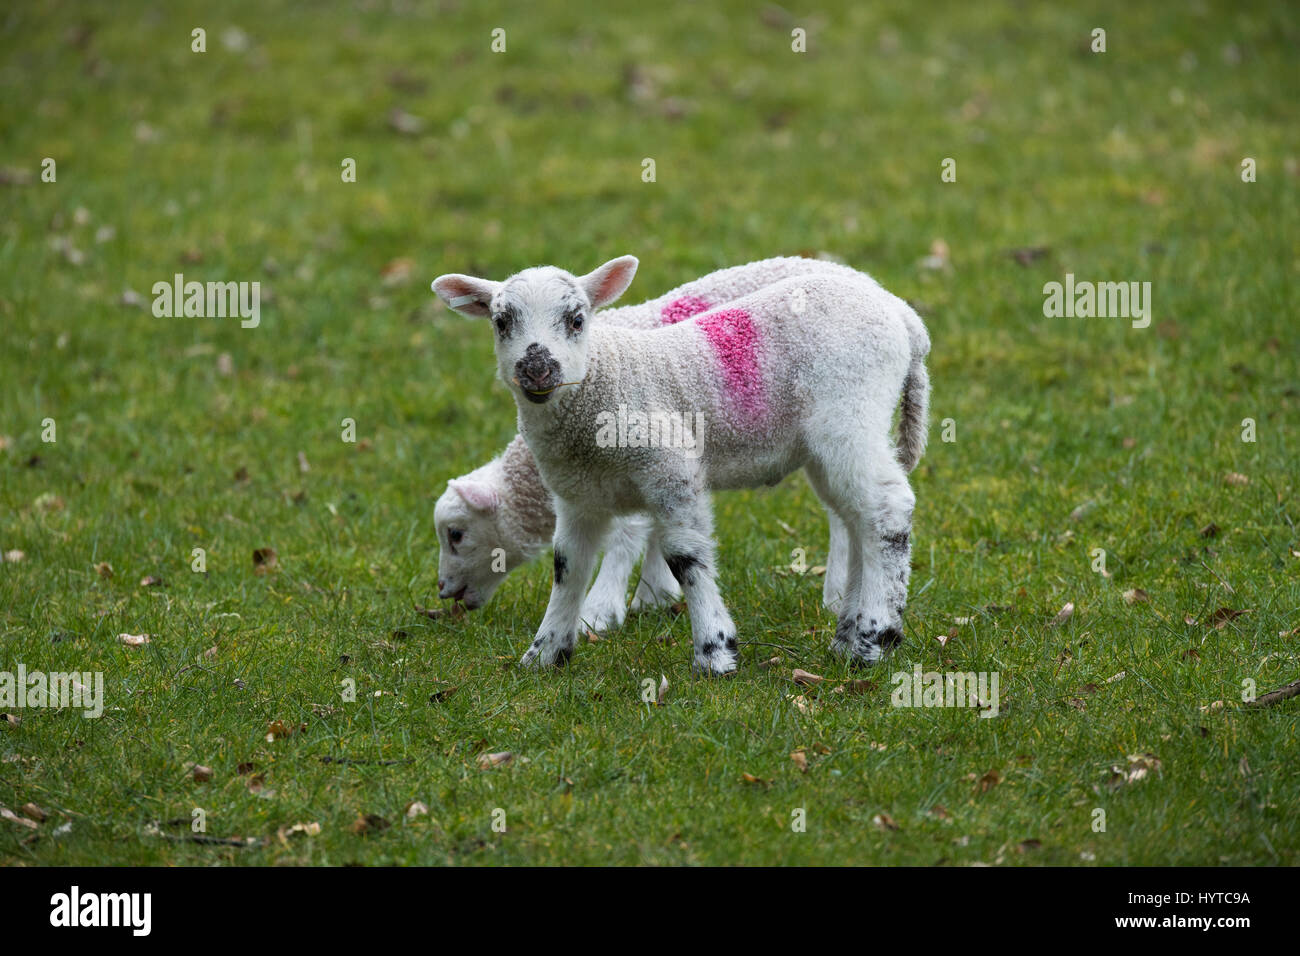 2 cute, adorable, twin lambs standing close together in a farm field in springtime. 1 is sniffing a leaf, 1 is staring at the camera. England, GB, UK. Stock Photo